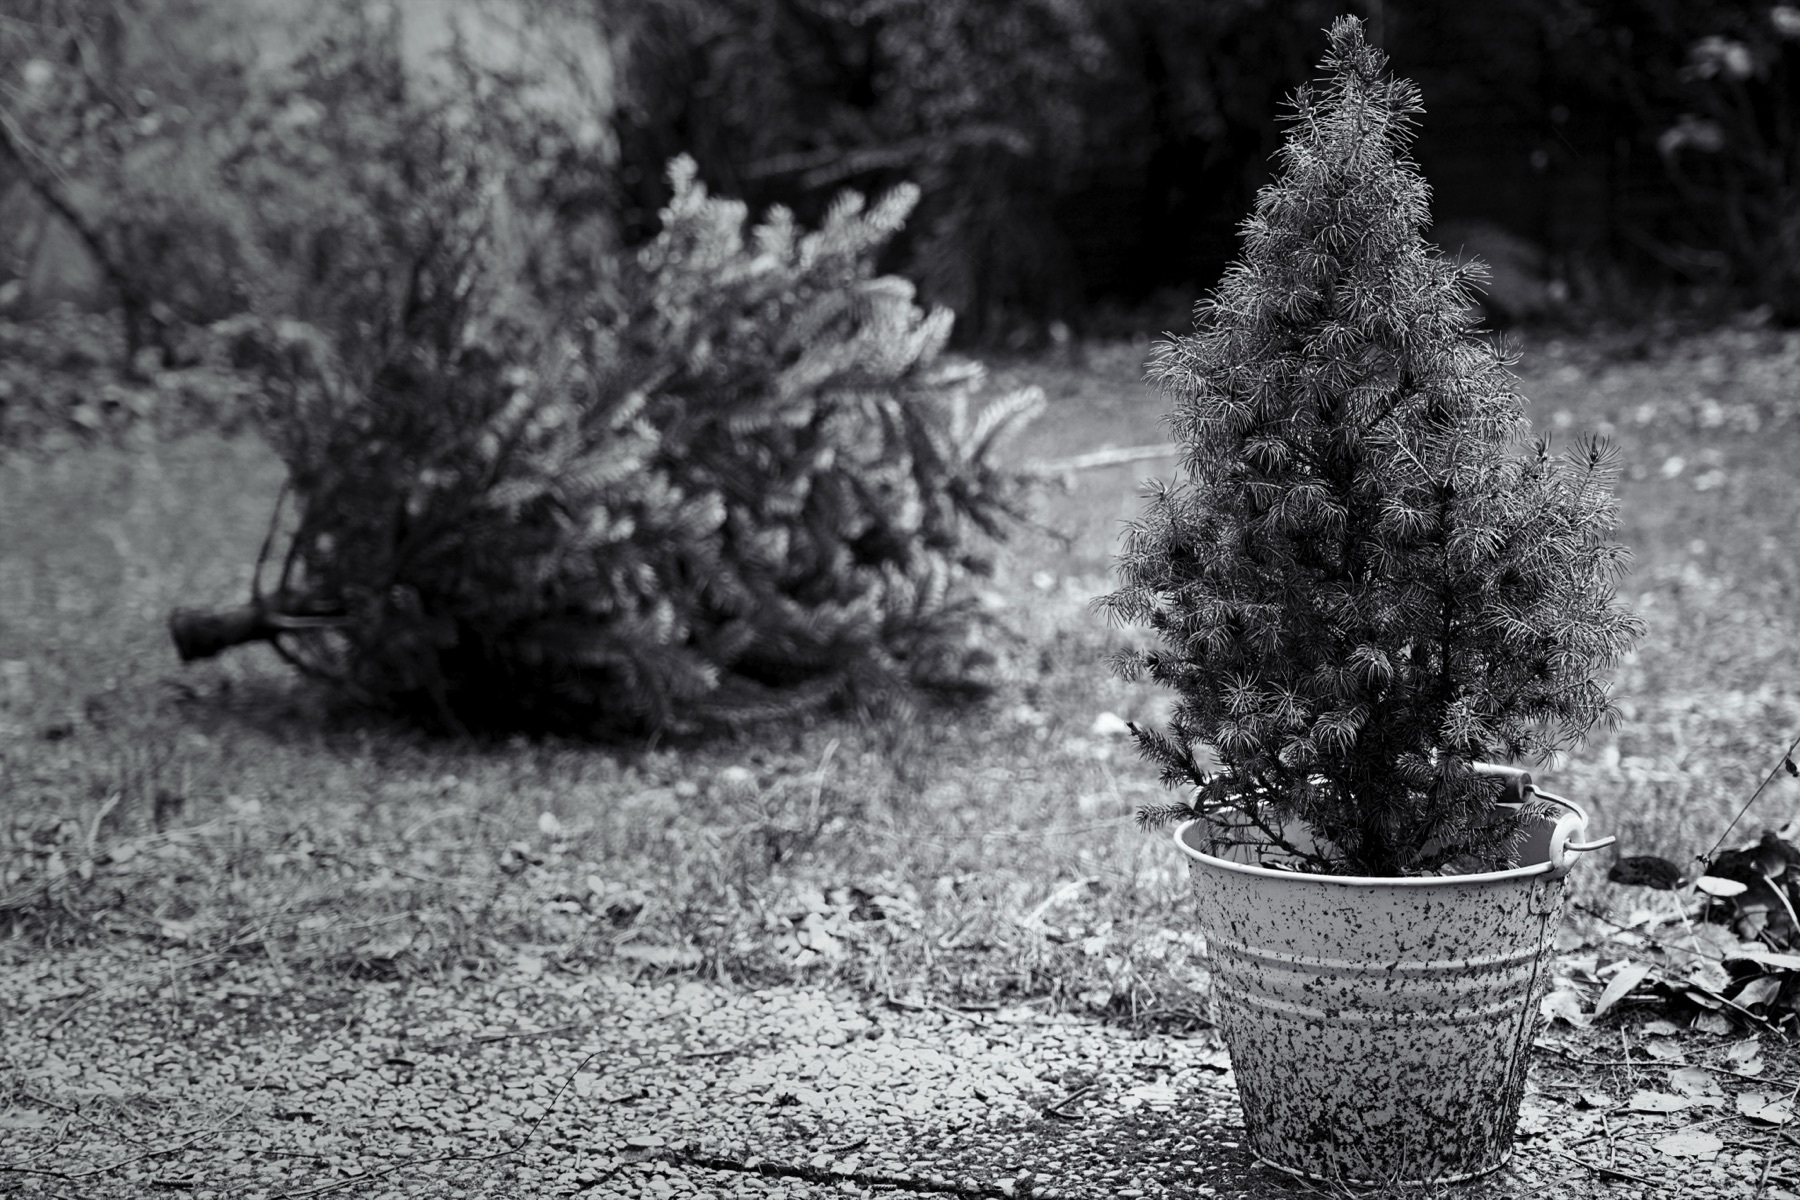 Black and White image. In the front, a small confier tree in a small and dirty pot. In the background, a cut christmas tree is laying in the grass.